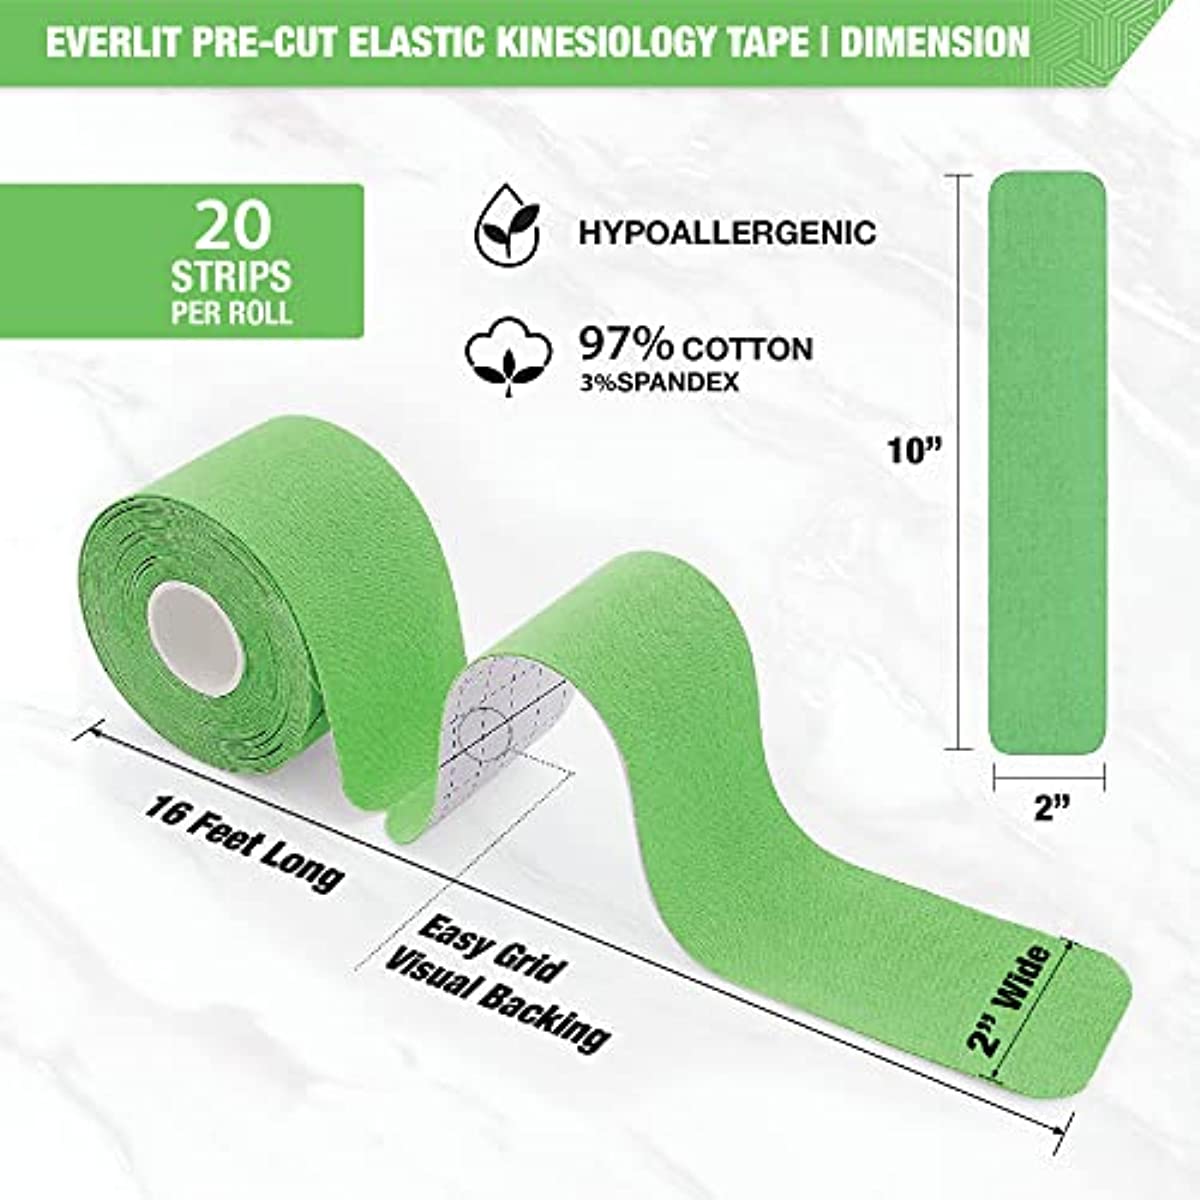 EVERLIT [Single] Pre-Cut Elastic Cotton Kinesiology Therapeutic Athletic Sports Tape, for Pain Relief and Support, 20 Precut 10” Strips (Lime Green)